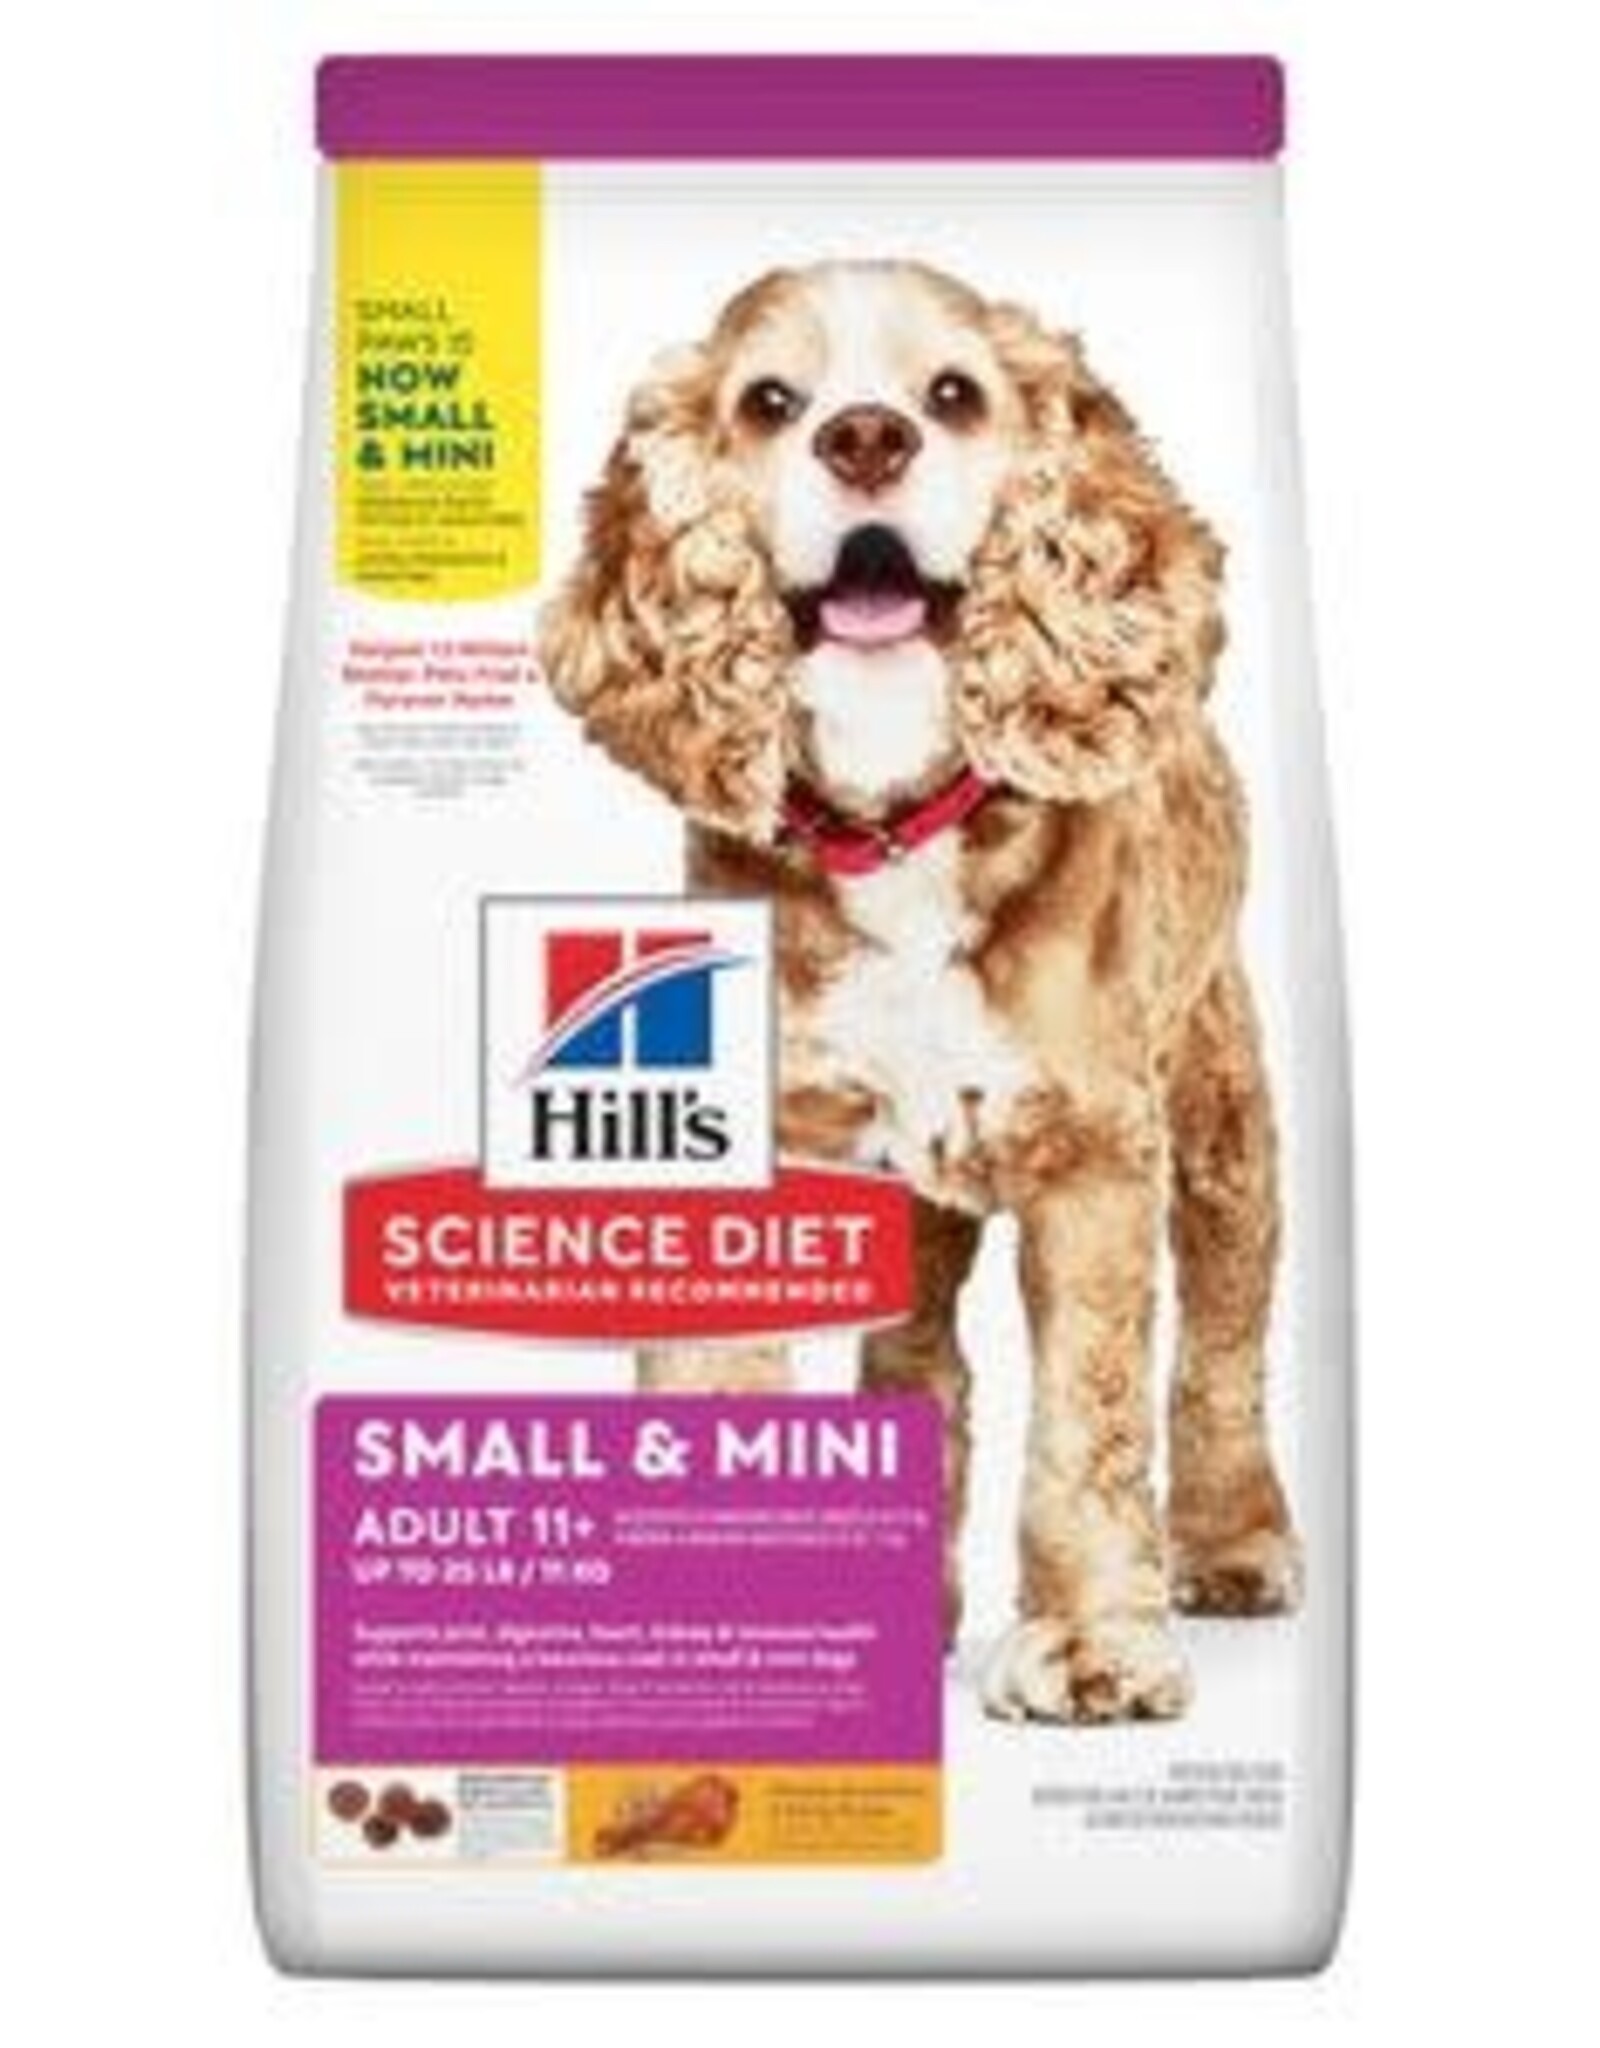 SCIENCE DIET HILL'S SCIENCE DIET CANINE SMALL PAWS SENIOR 11+ 4.5LBS